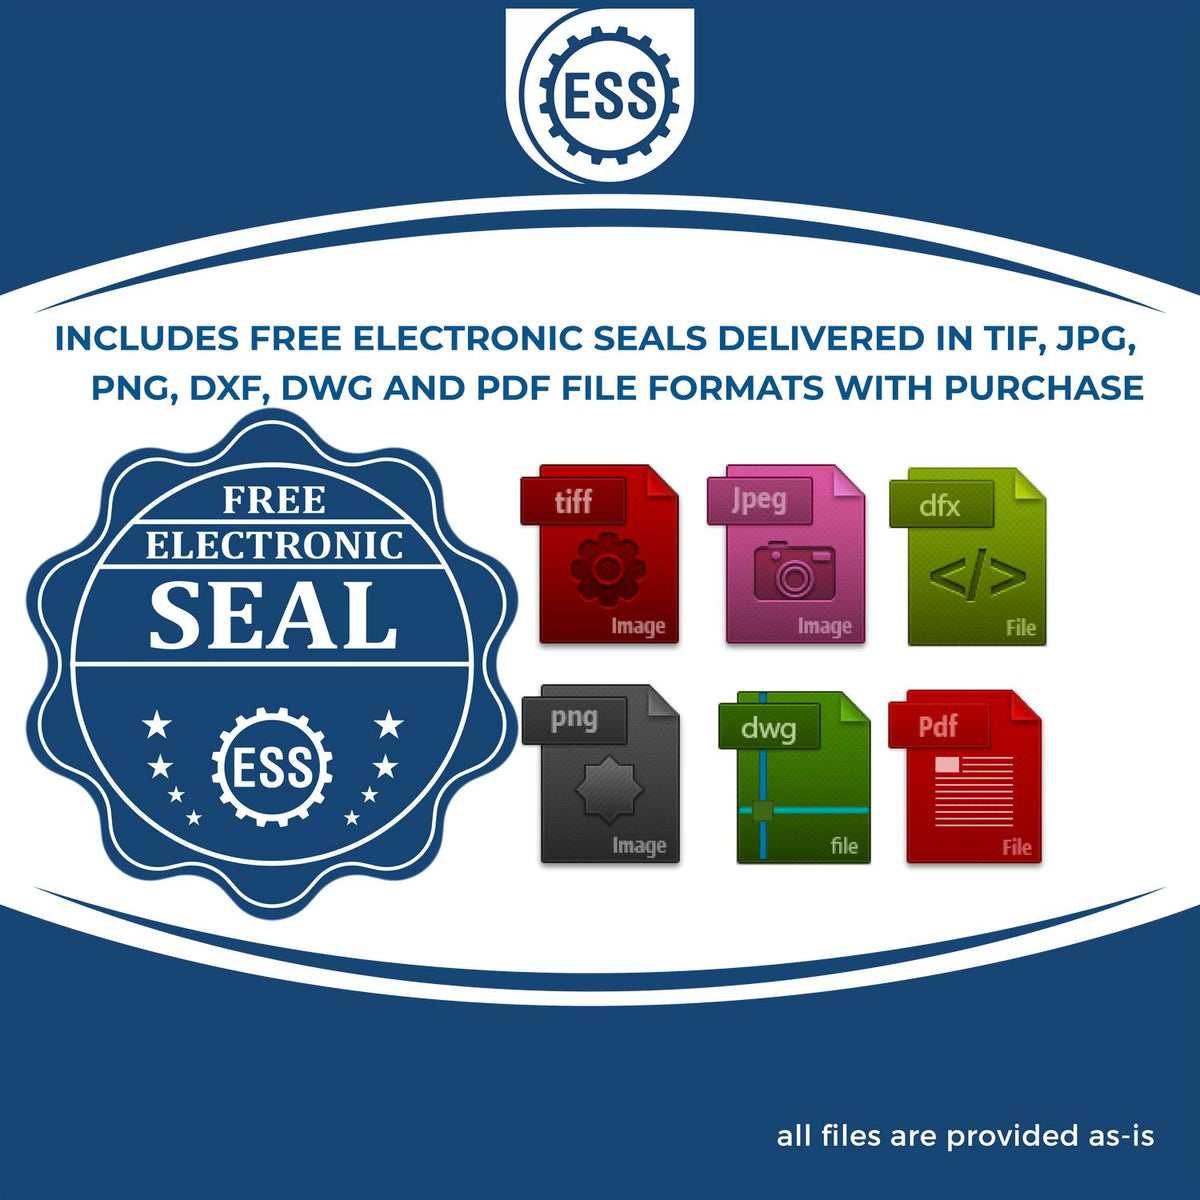 An infographic for the free electronic seal for the Gift West Virginia Geologist Seal illustrating the different file type icons such as DXF, DWG, TIF, JPG and PNG.